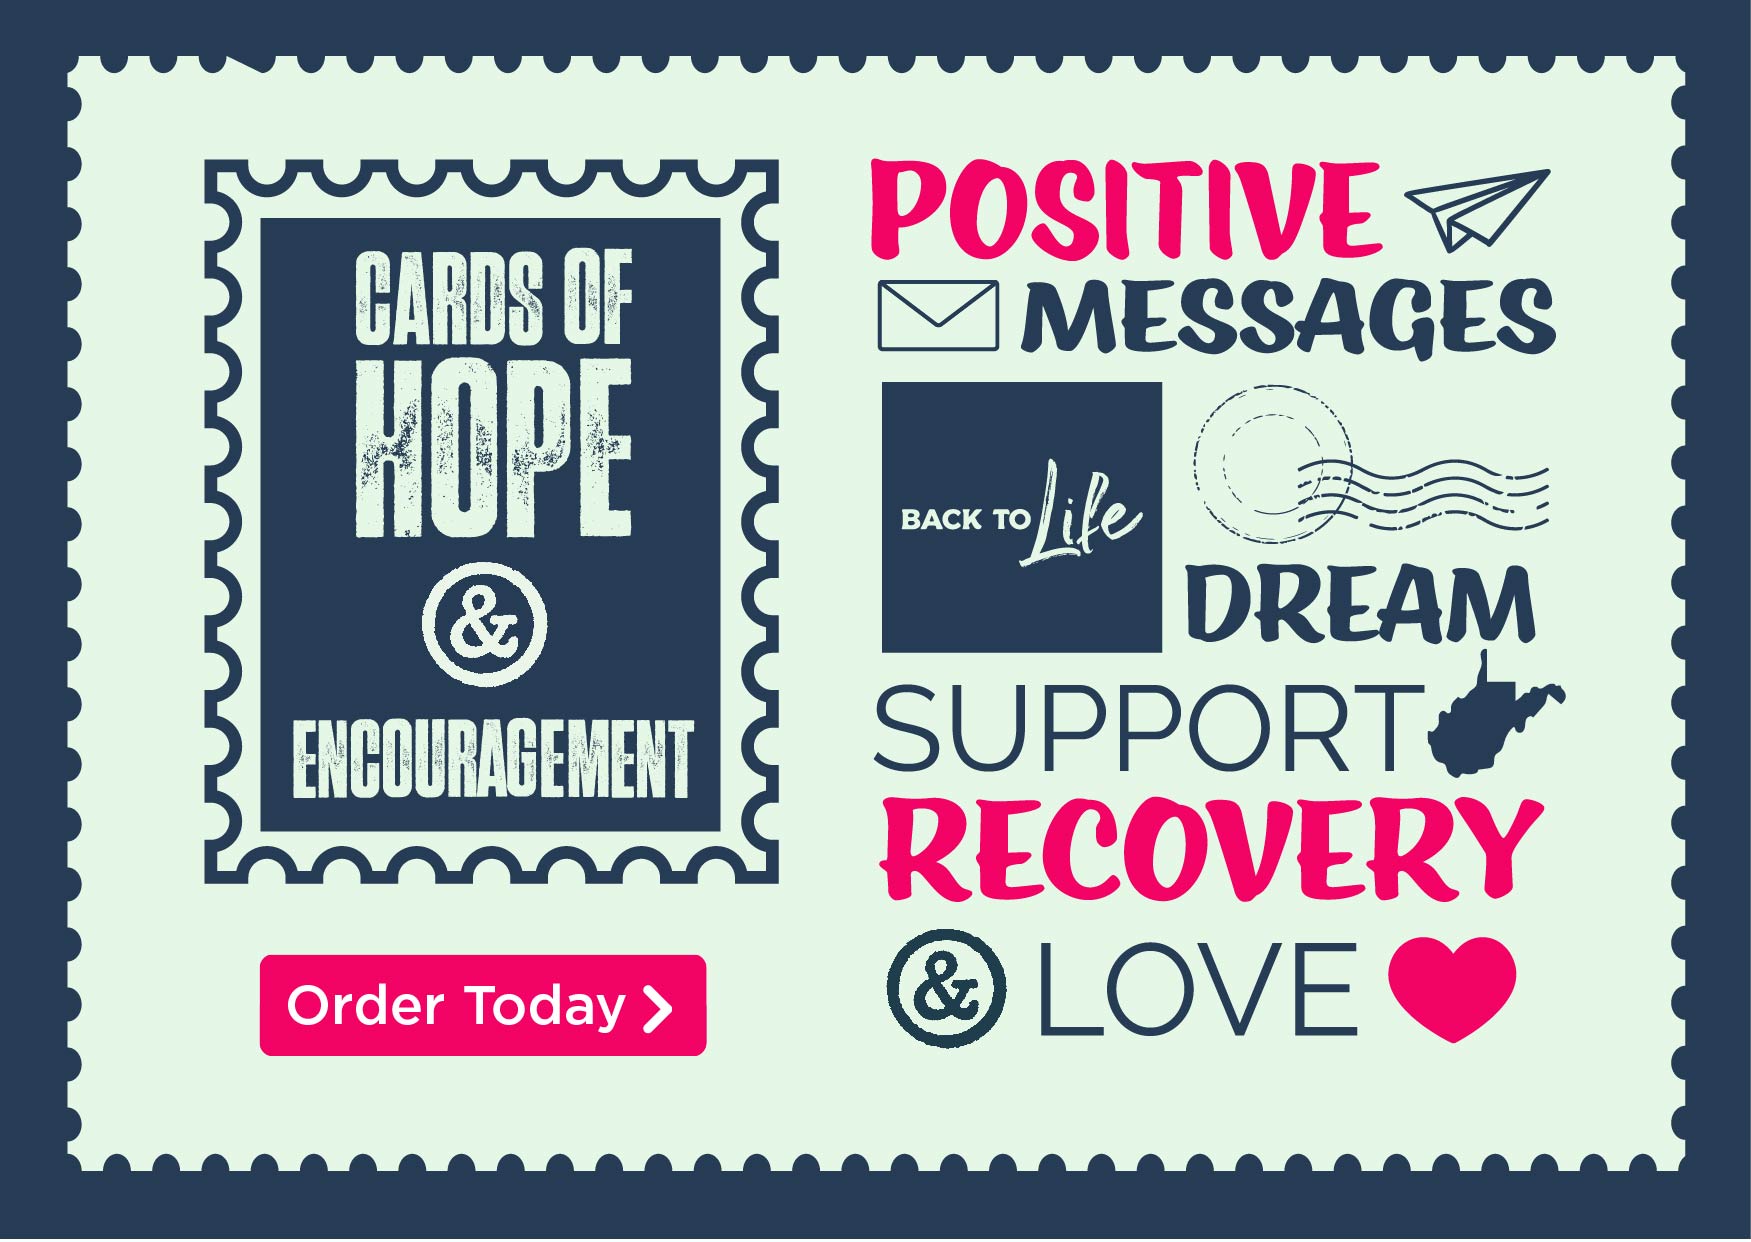 Cards of Hope and Encouragement